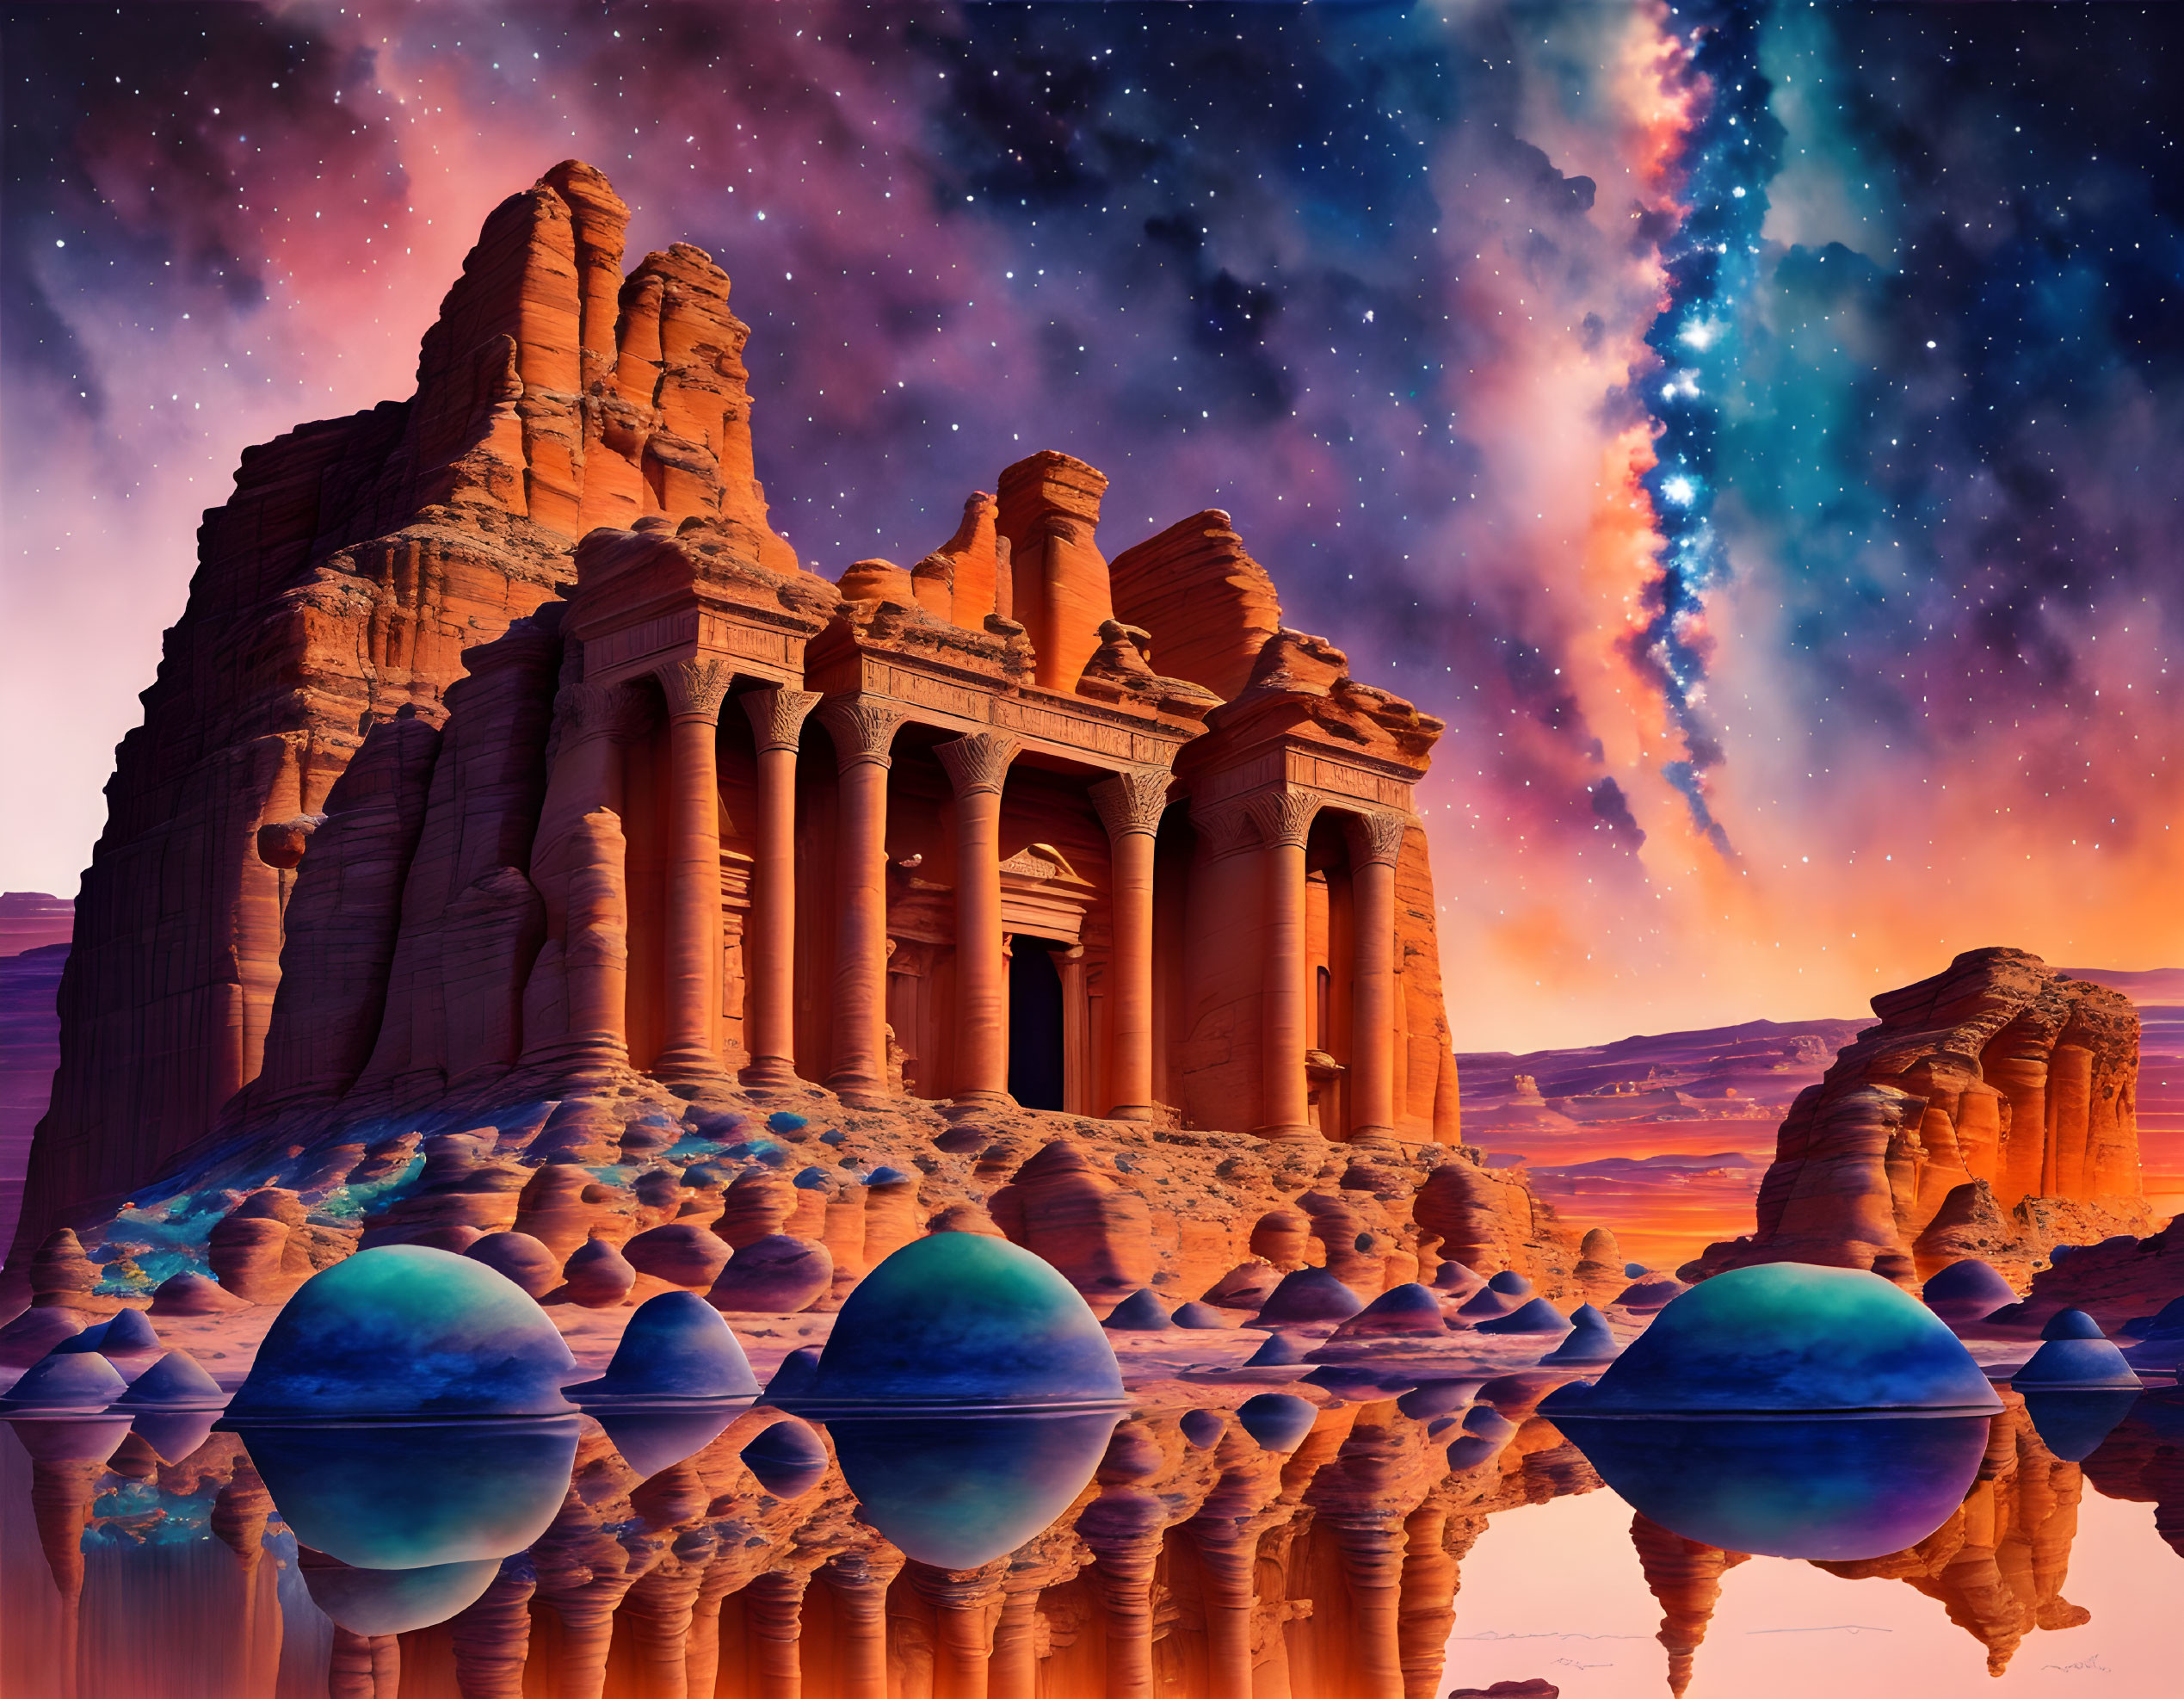 Fantastical landscape with ancient rock-cut architecture and vibrant sunset skies